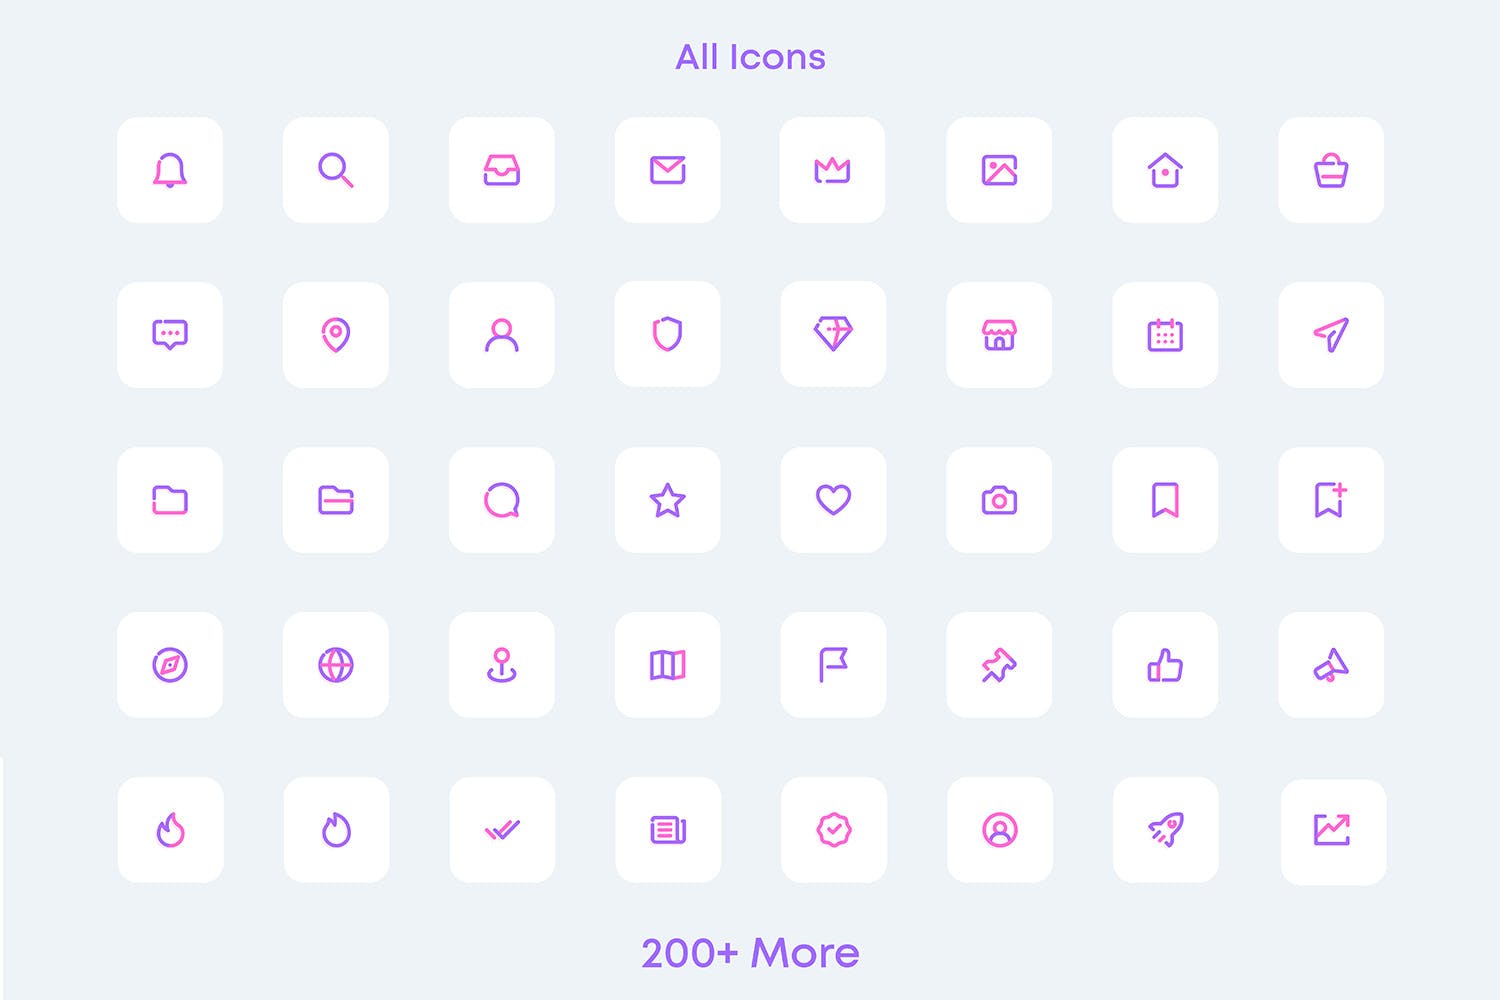 Web网站/APP应用UI设计图标素材包 Complete Web and Mobile UI Icons Pack插图(5)